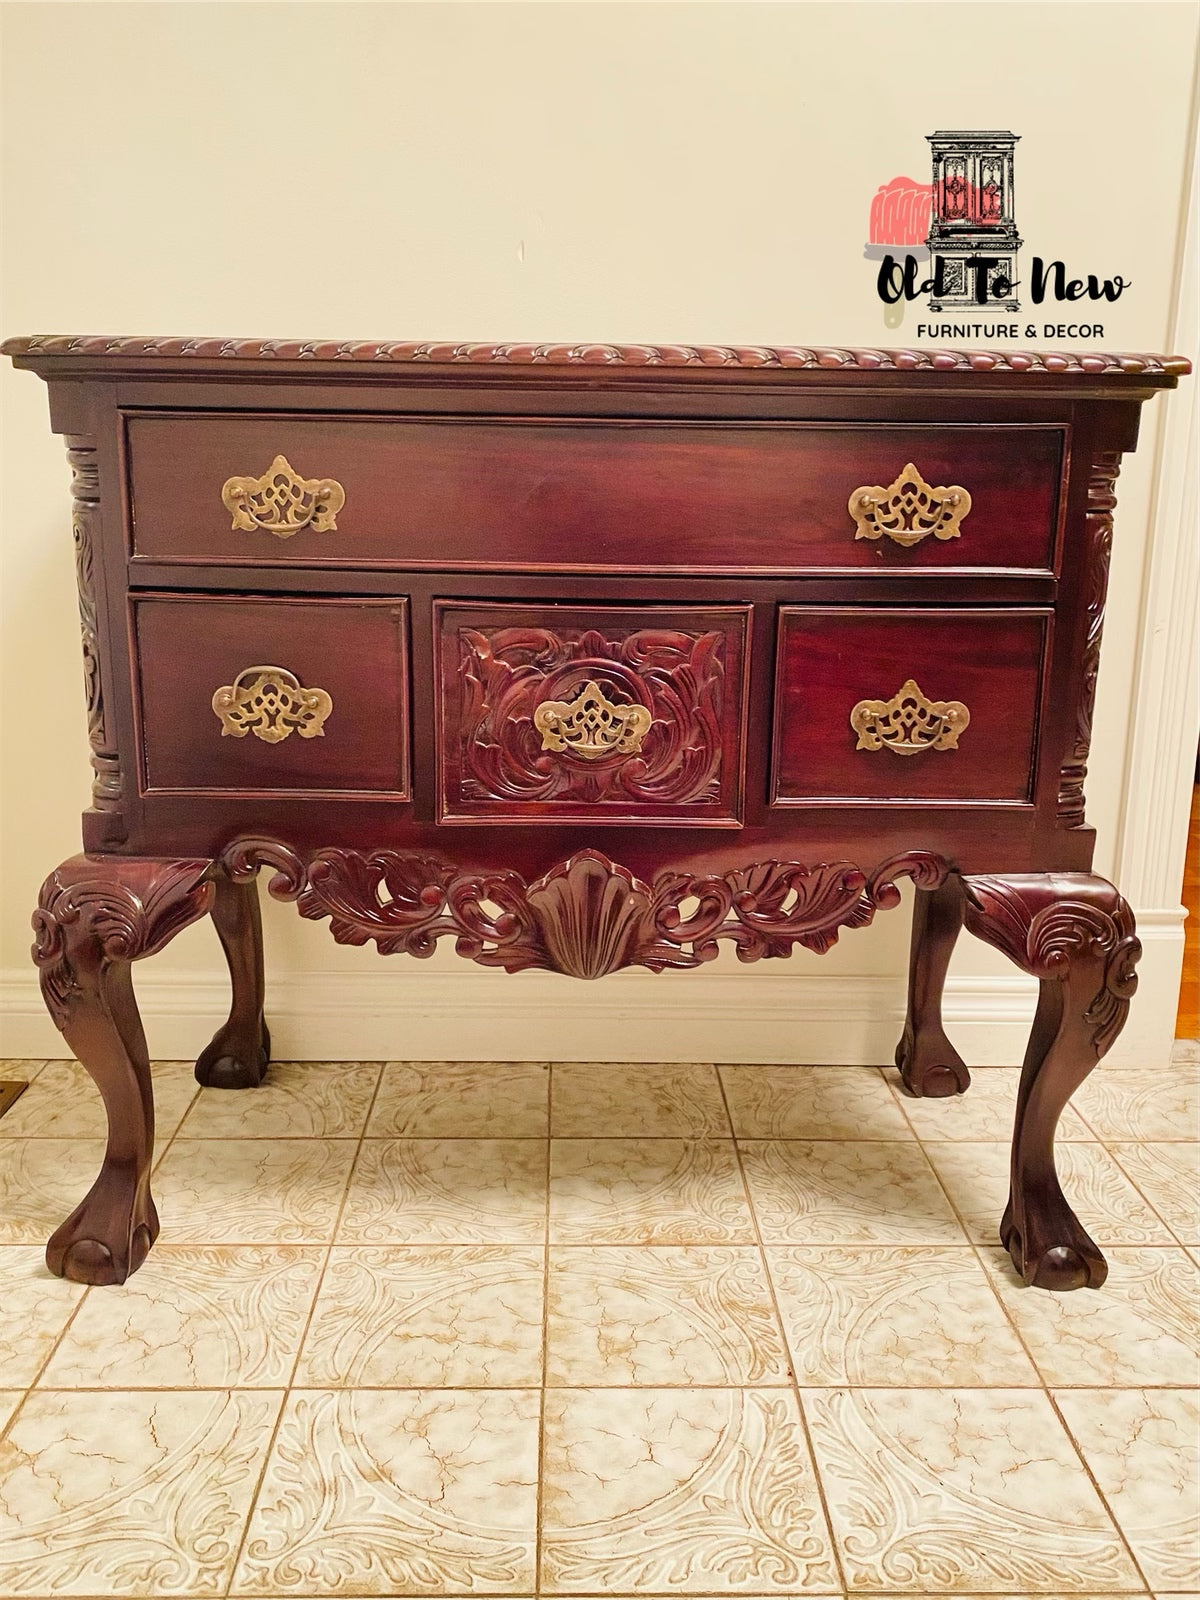 Stunning Antique Wood Furniture Available for Purchase; Choose Paint Color and Customize This Compact Sideboard Entryway Storage Unit.